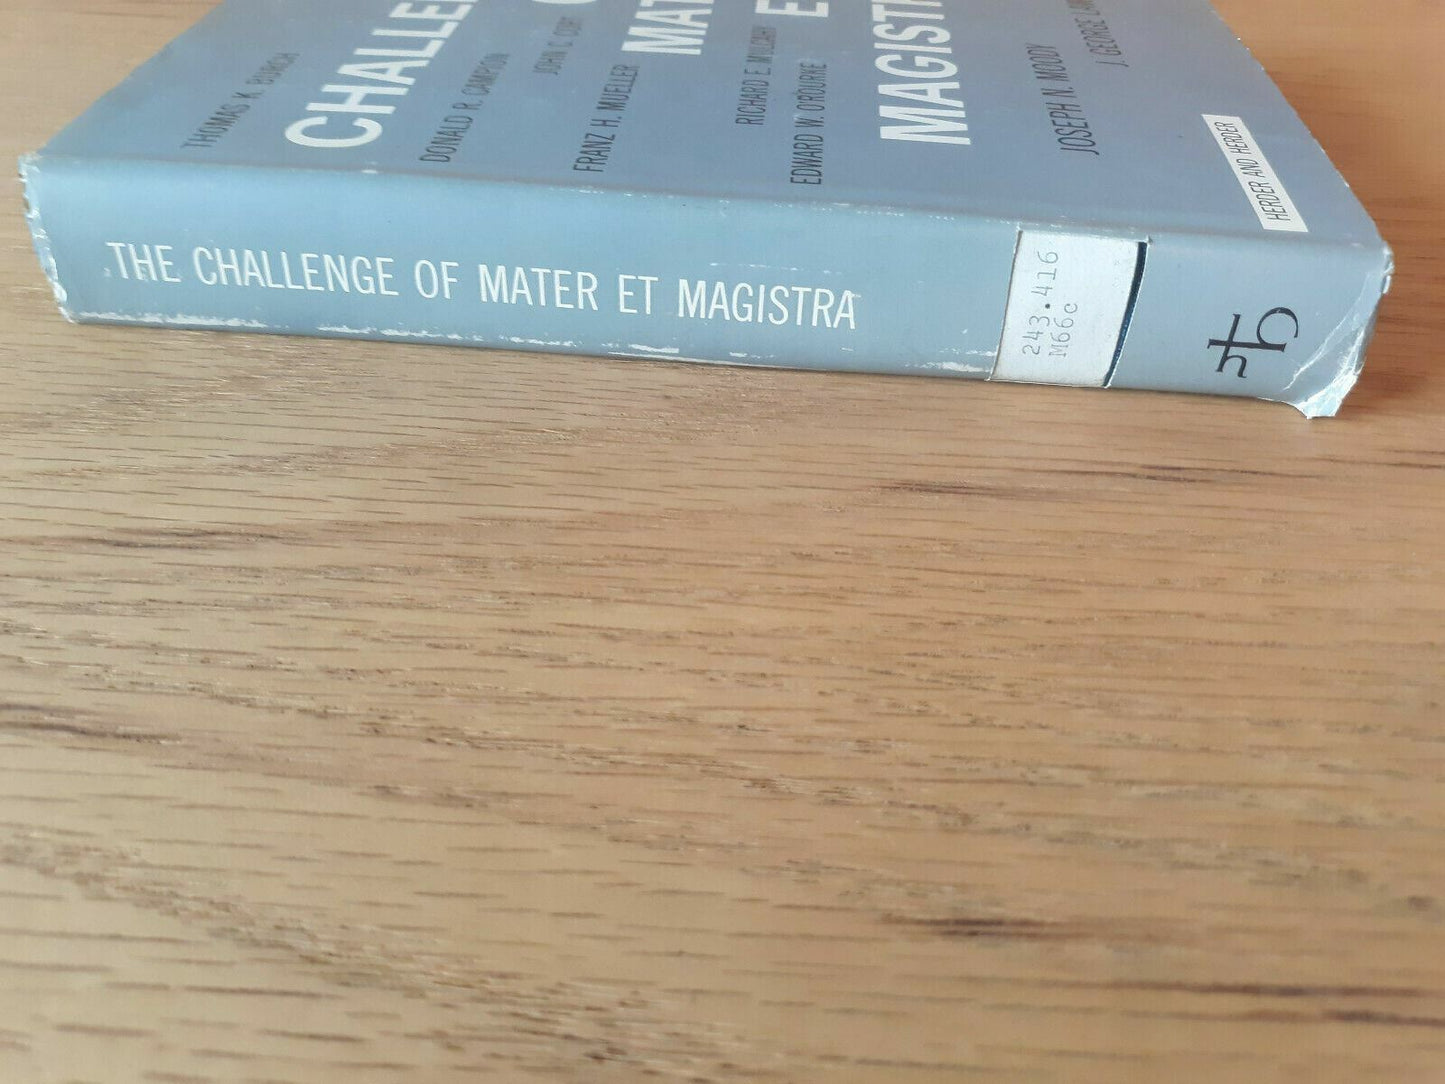 THE CHALLENGE OF MATER ET MAGISTRA Moody & Lawler 1963 Hardcover DJ